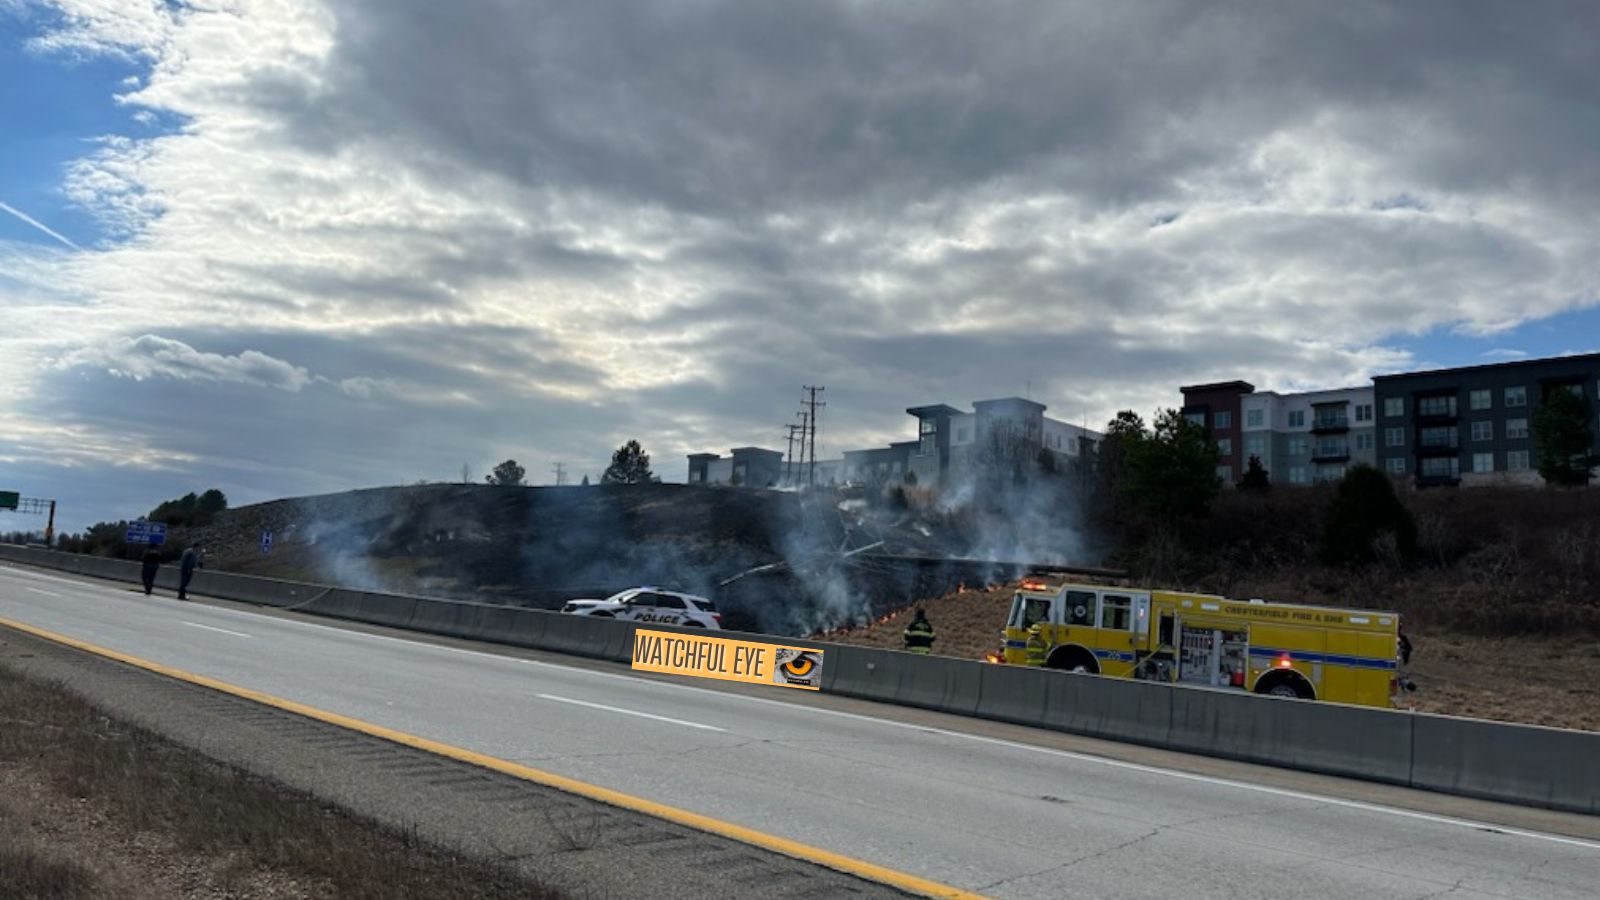 Crash & fire caused shutdown on Rt. 288 in Chesterfield